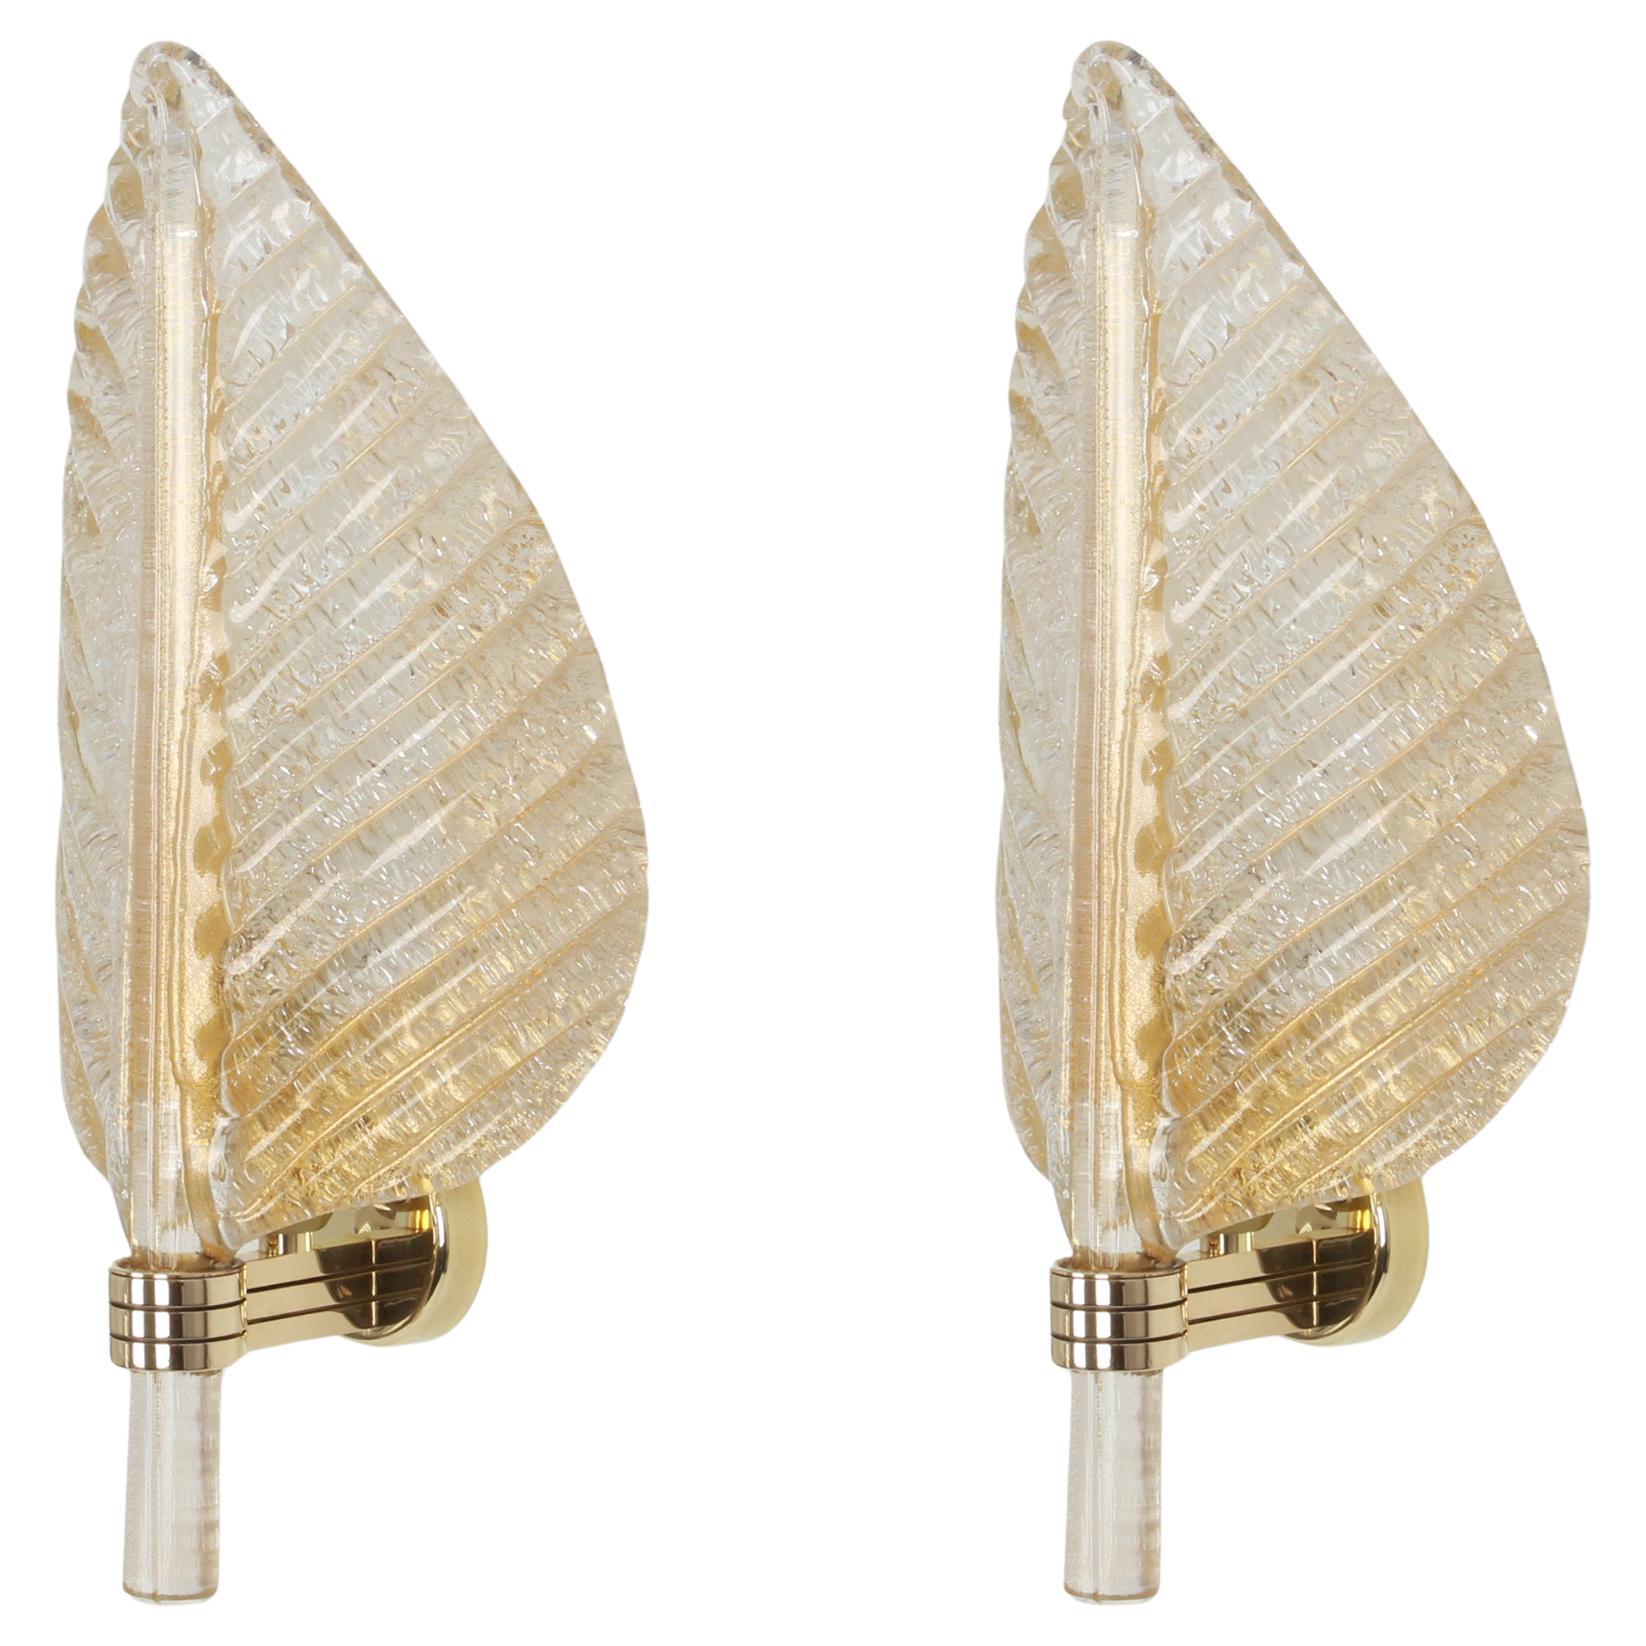 Pair of Murano Glass Wall Sconces by Barovier & Toso, Italy, 1970s For Sale